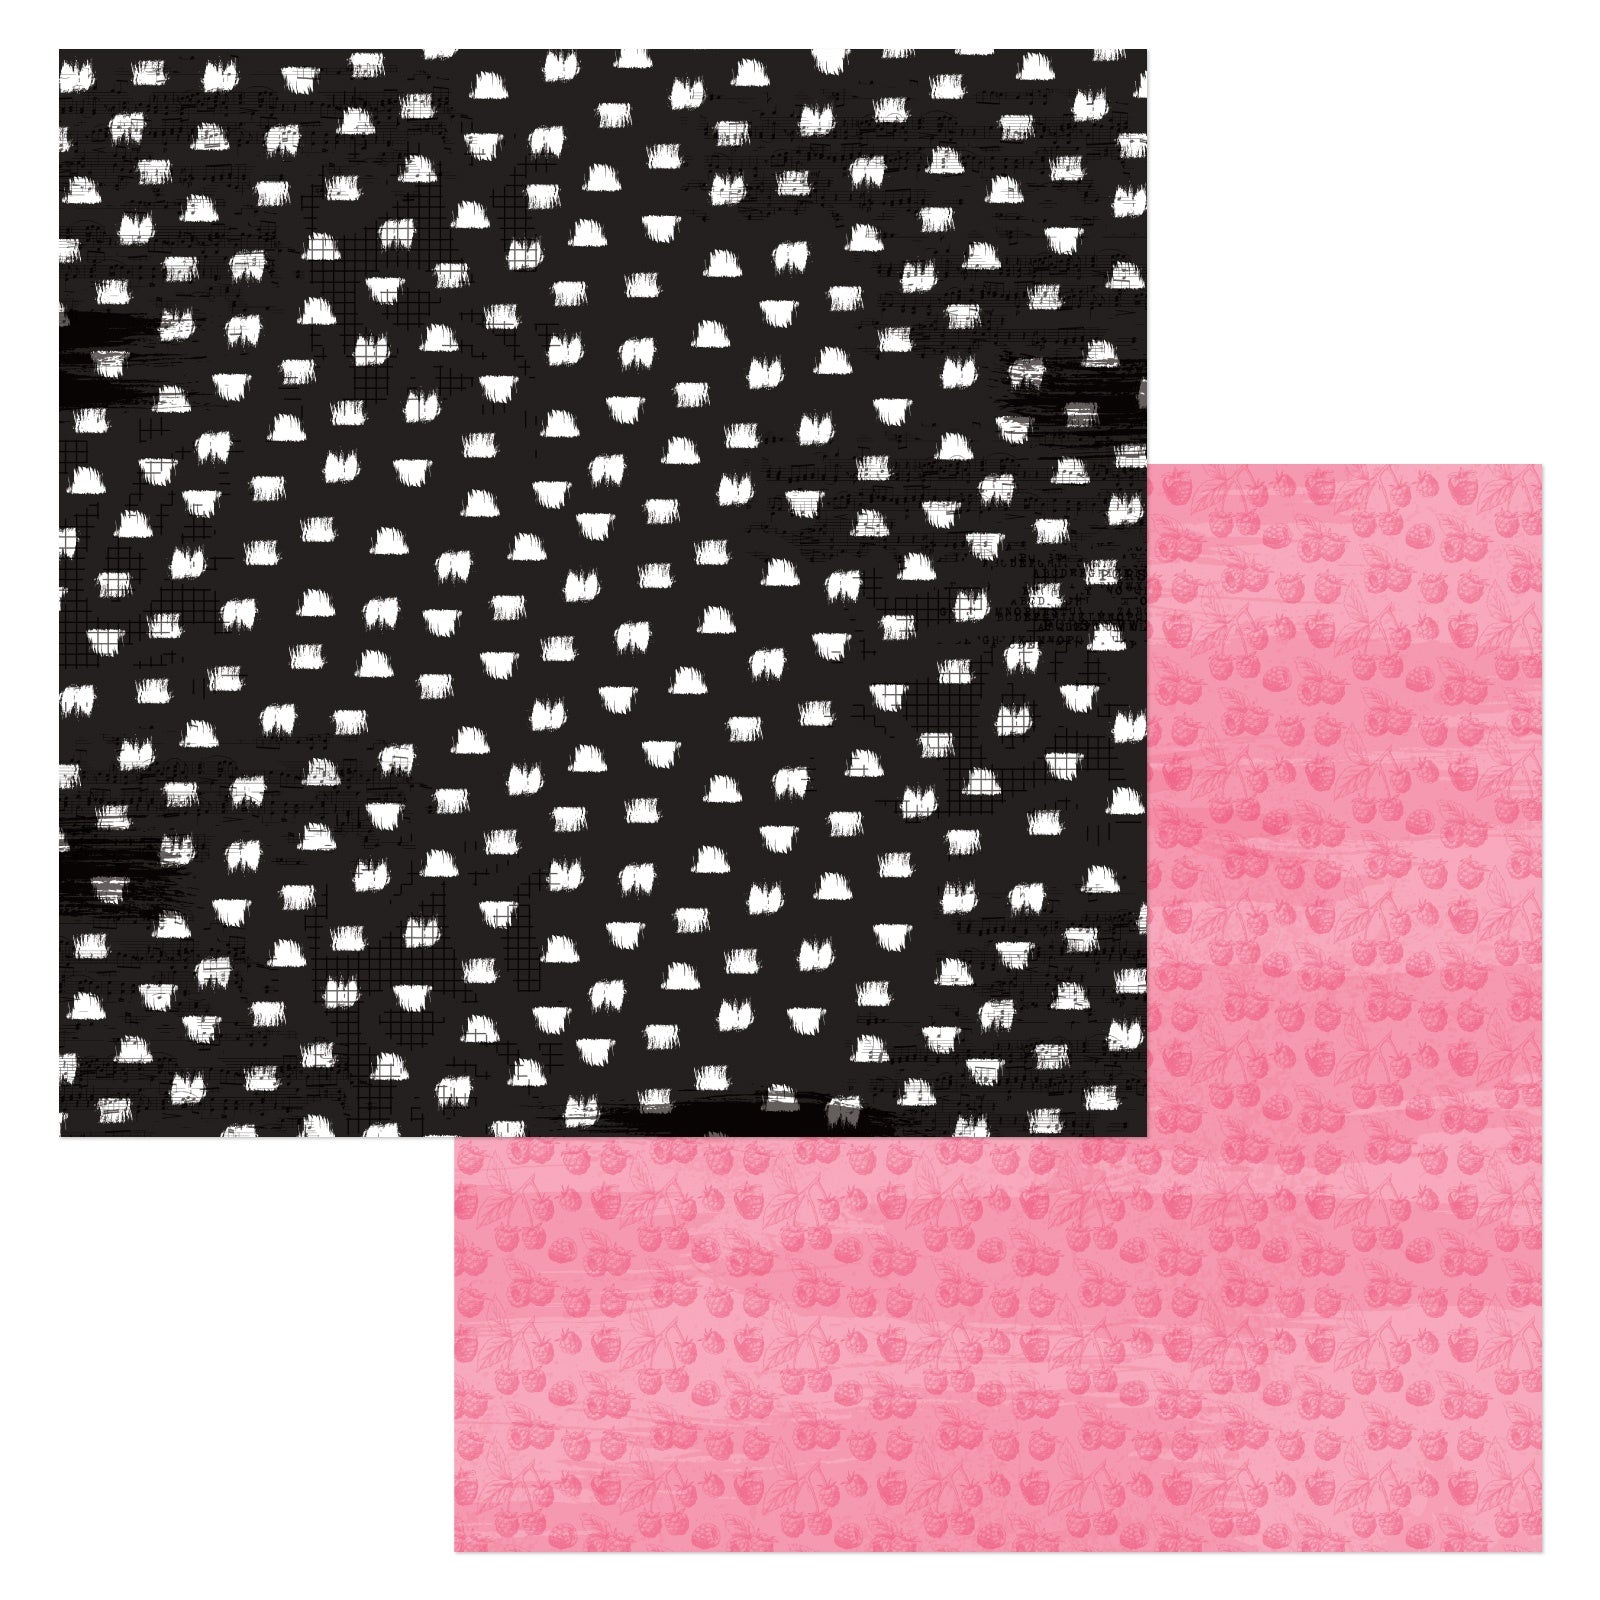 6 pieces of double sided peachy pink Scrapbook Paper 4x6 photo mats #1425